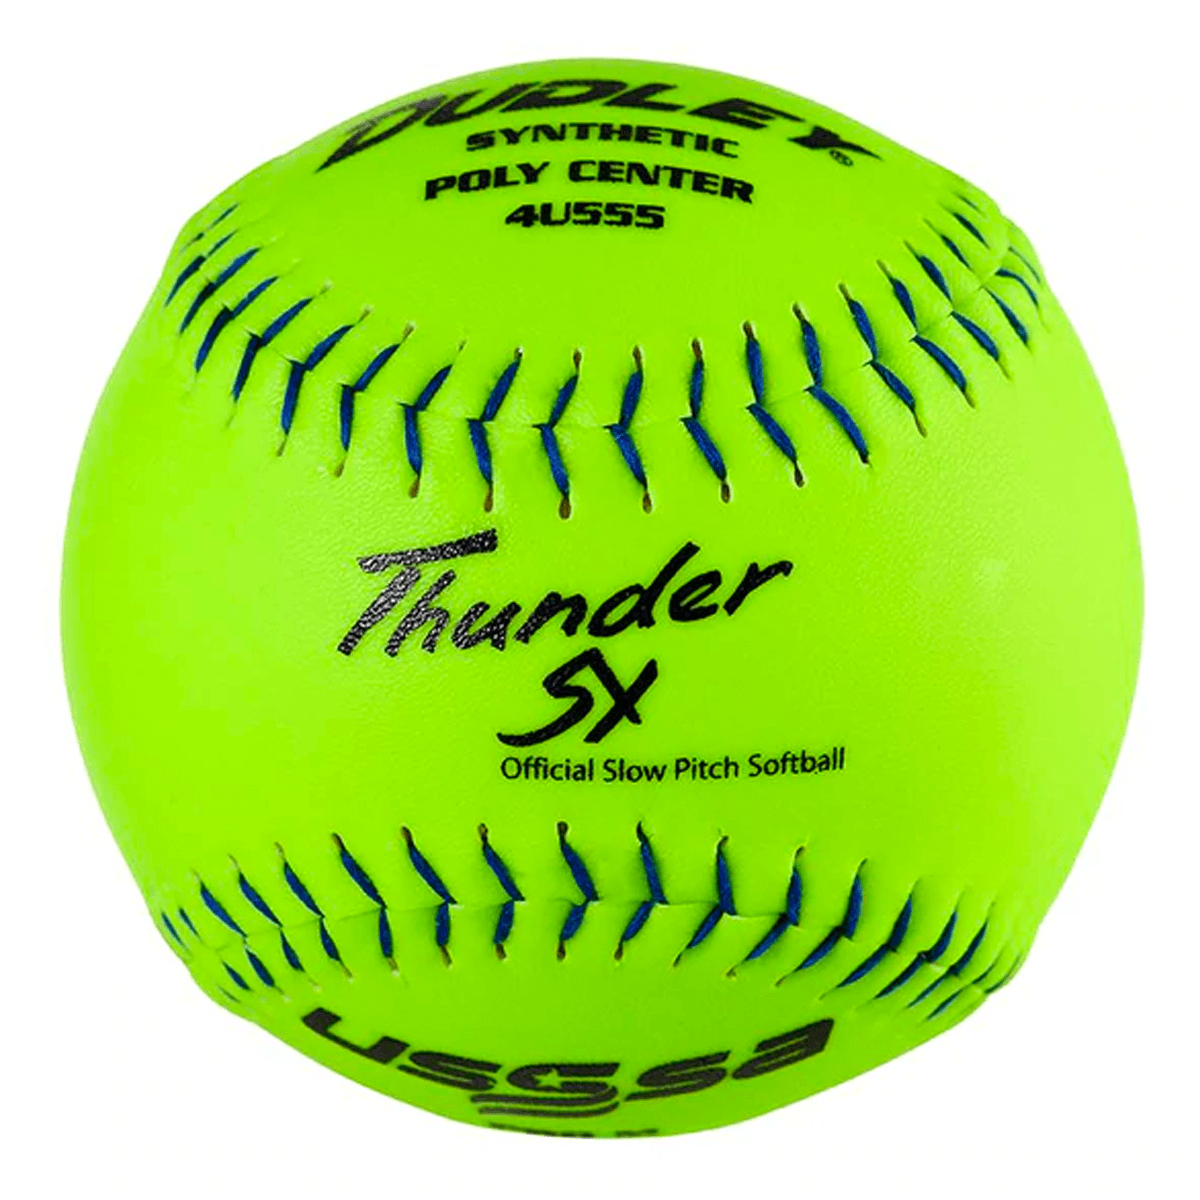 Dudley Thunder SY Synthetic Pro-M 44/375 USSSA 12